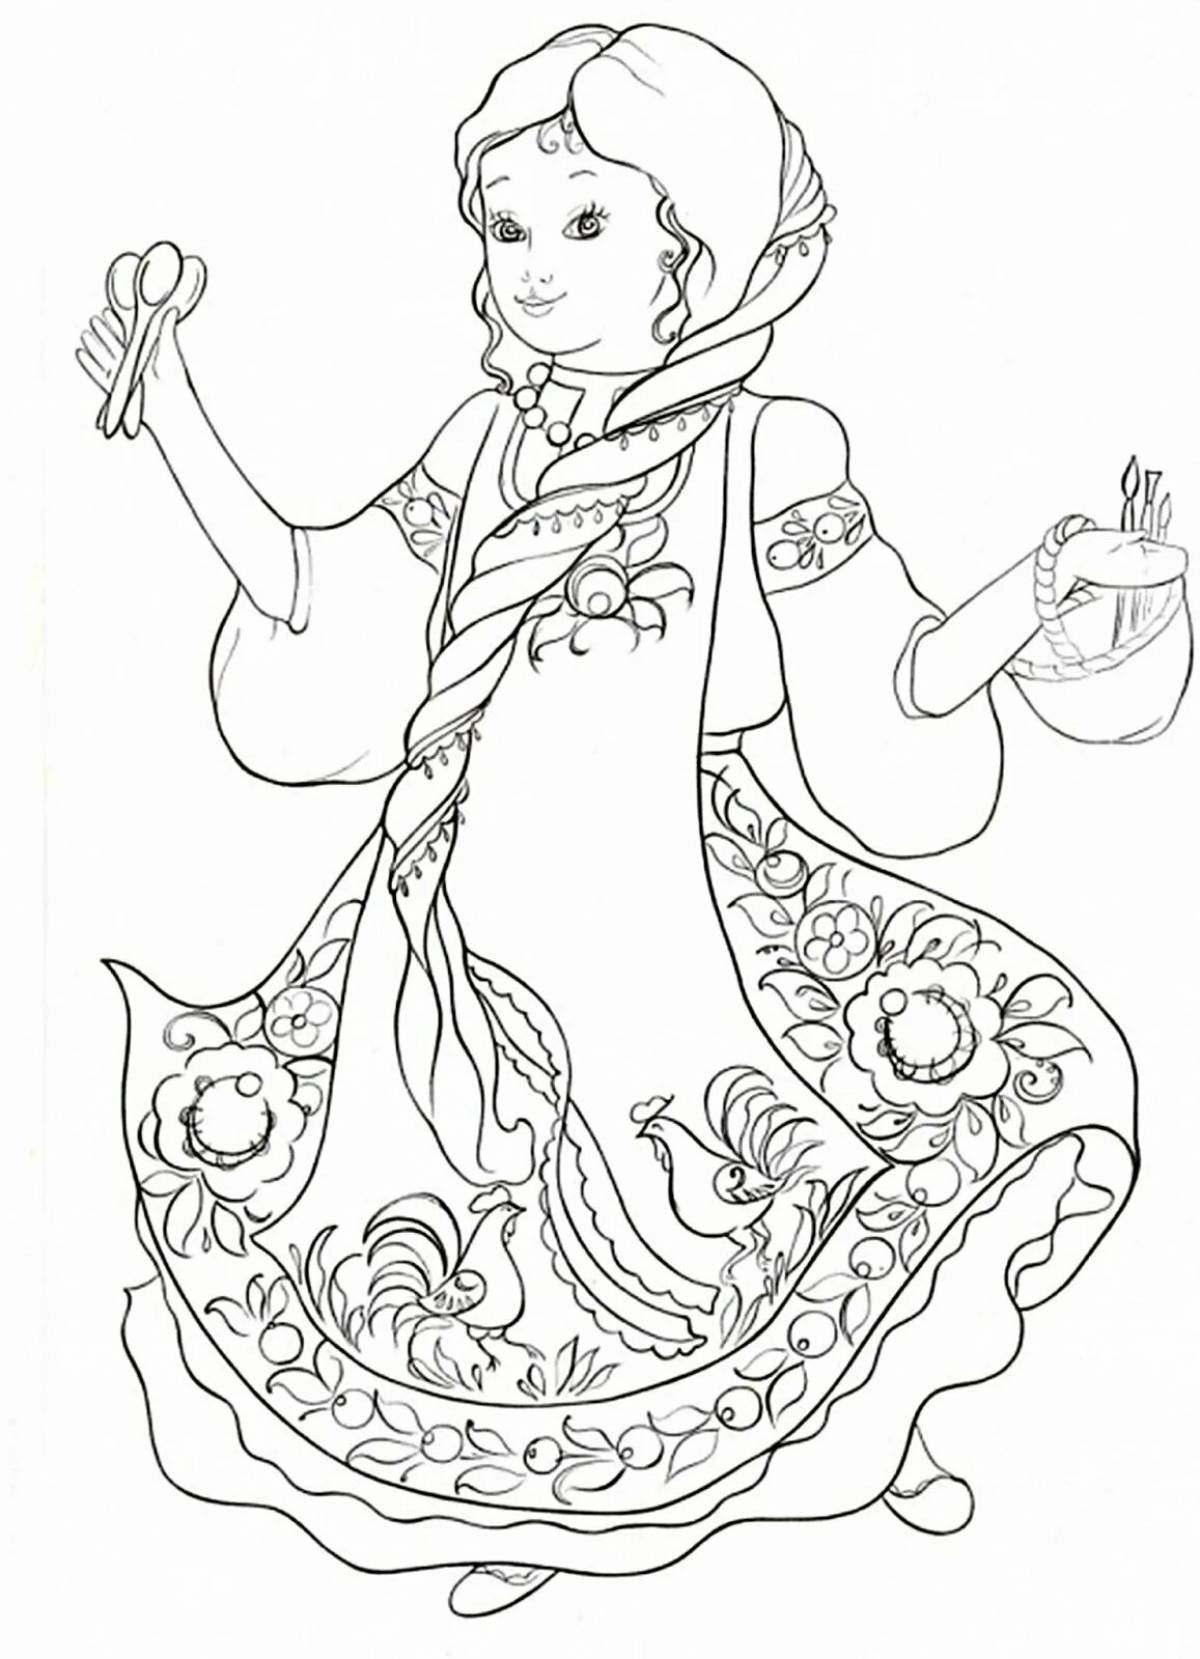 Inviting coloring book based on Bazhov's fairy tales